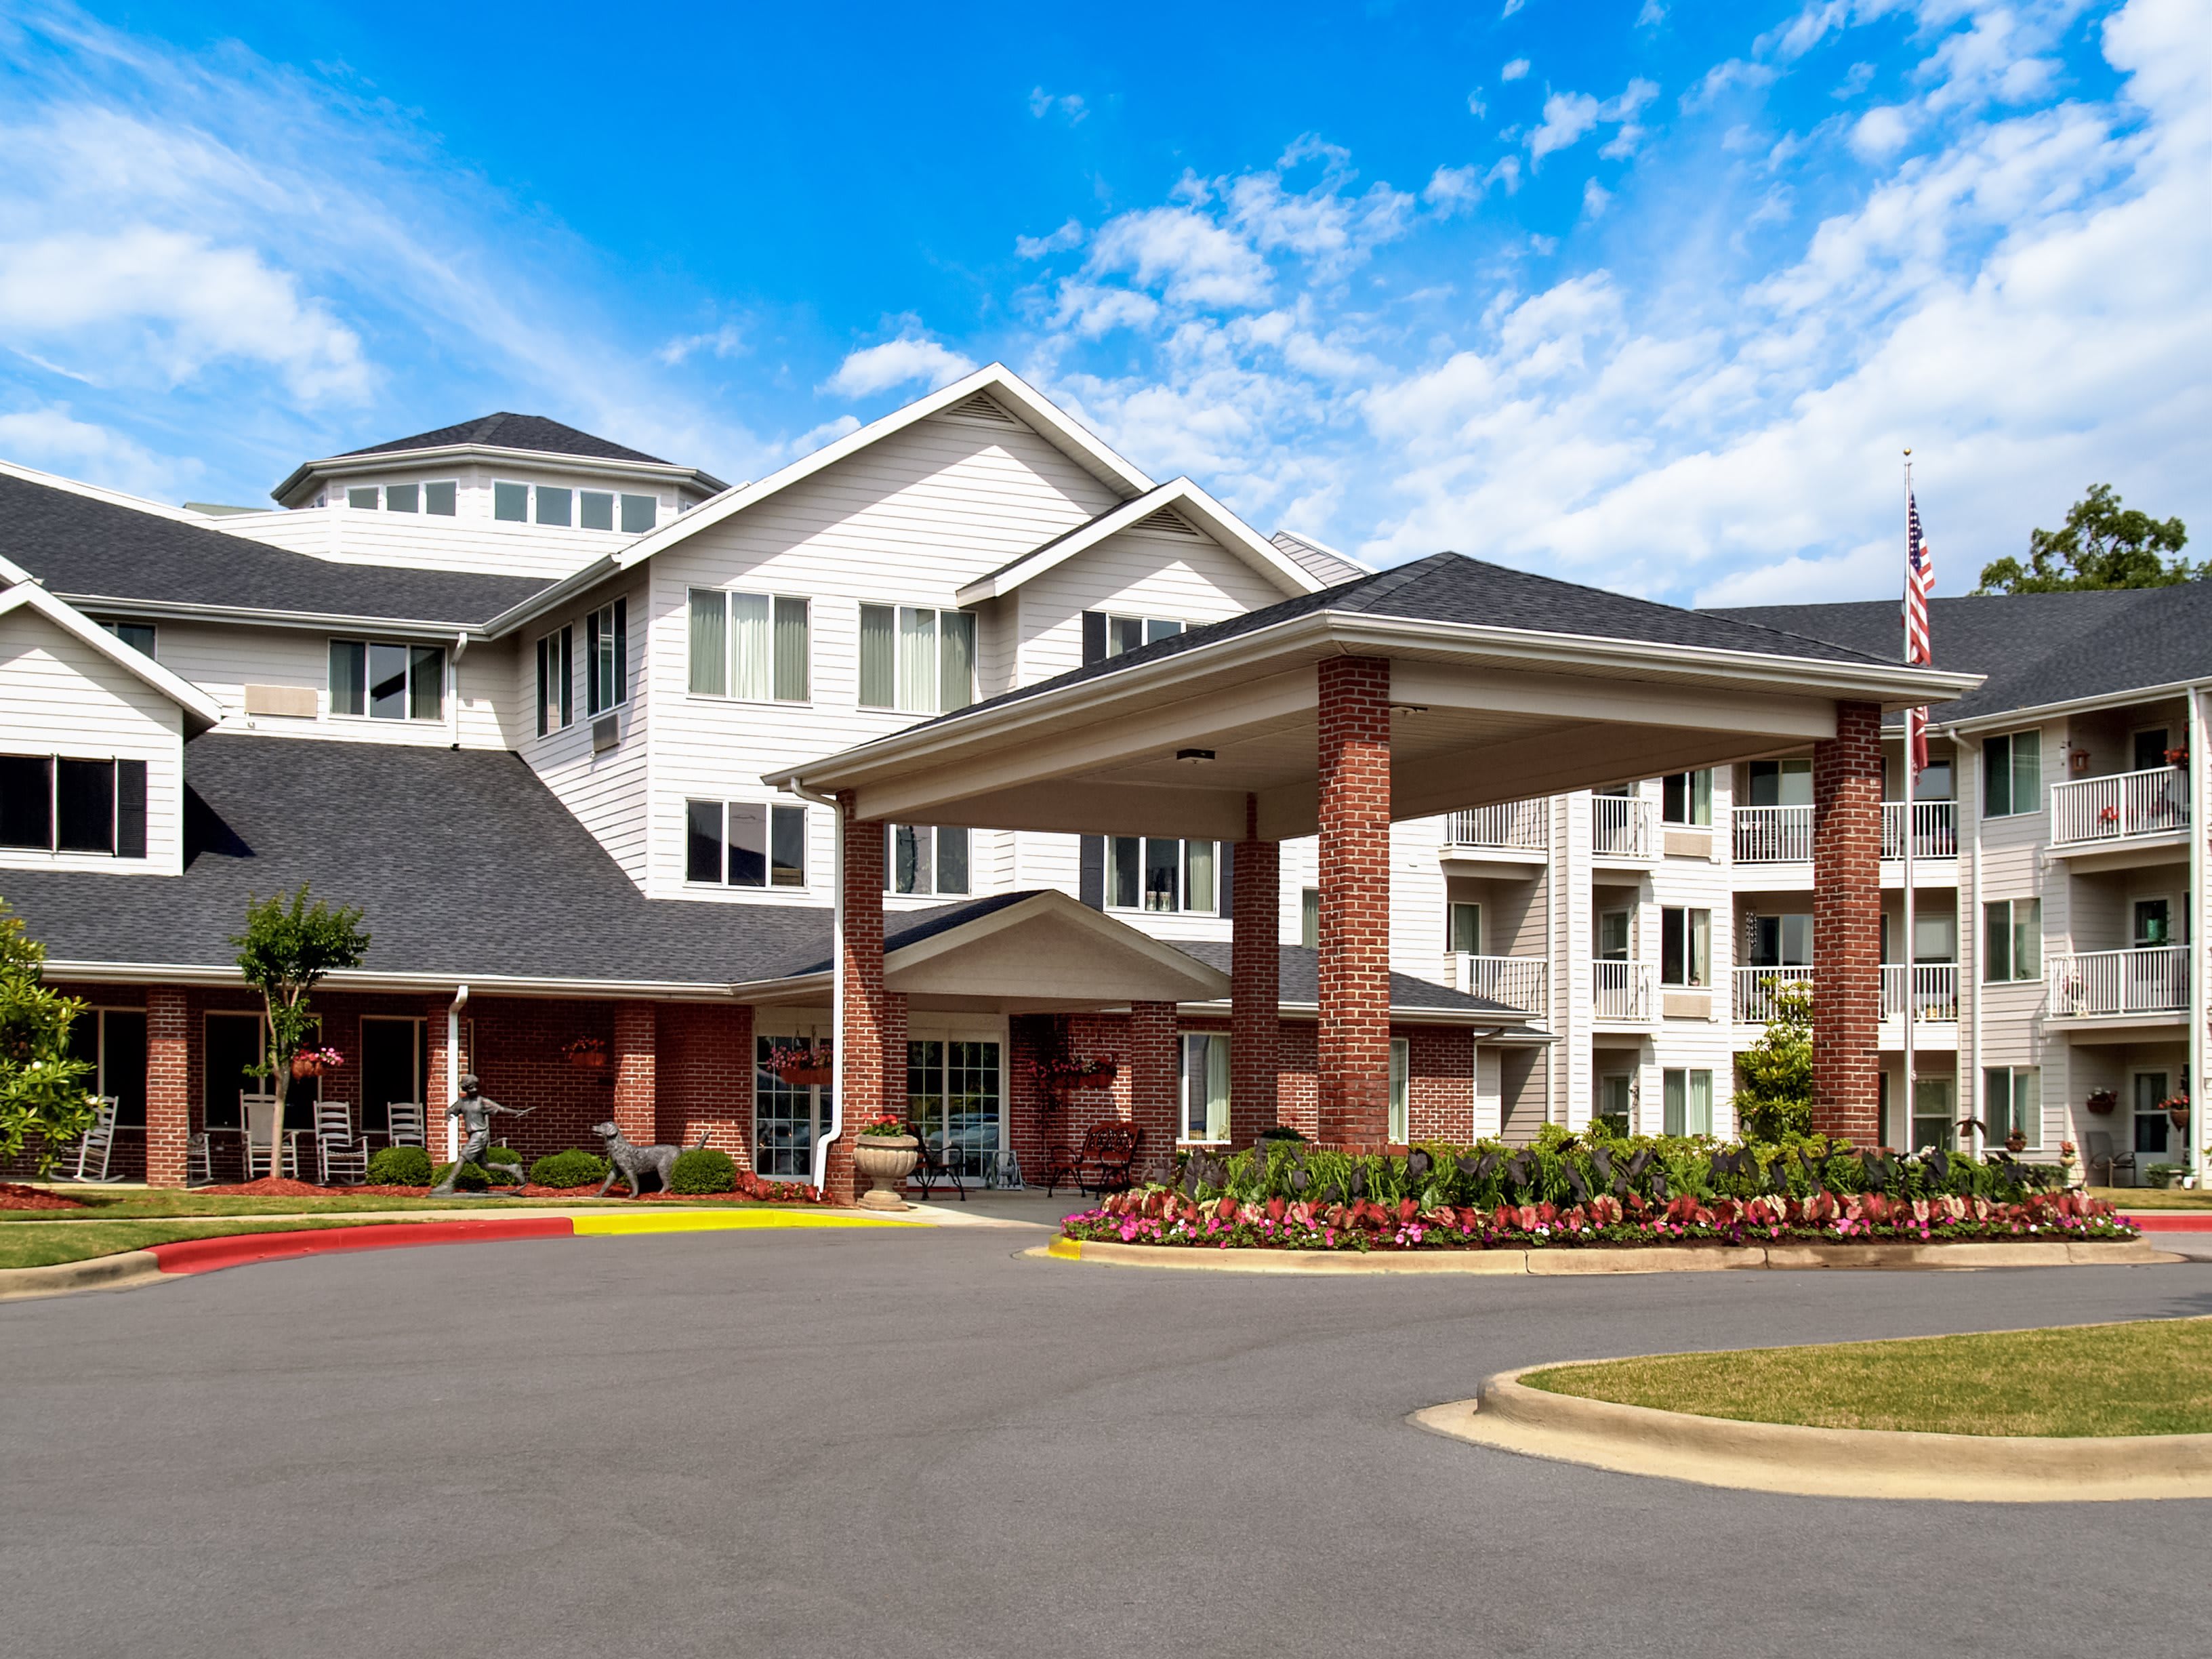 Assisted Living Facility In Milpitas